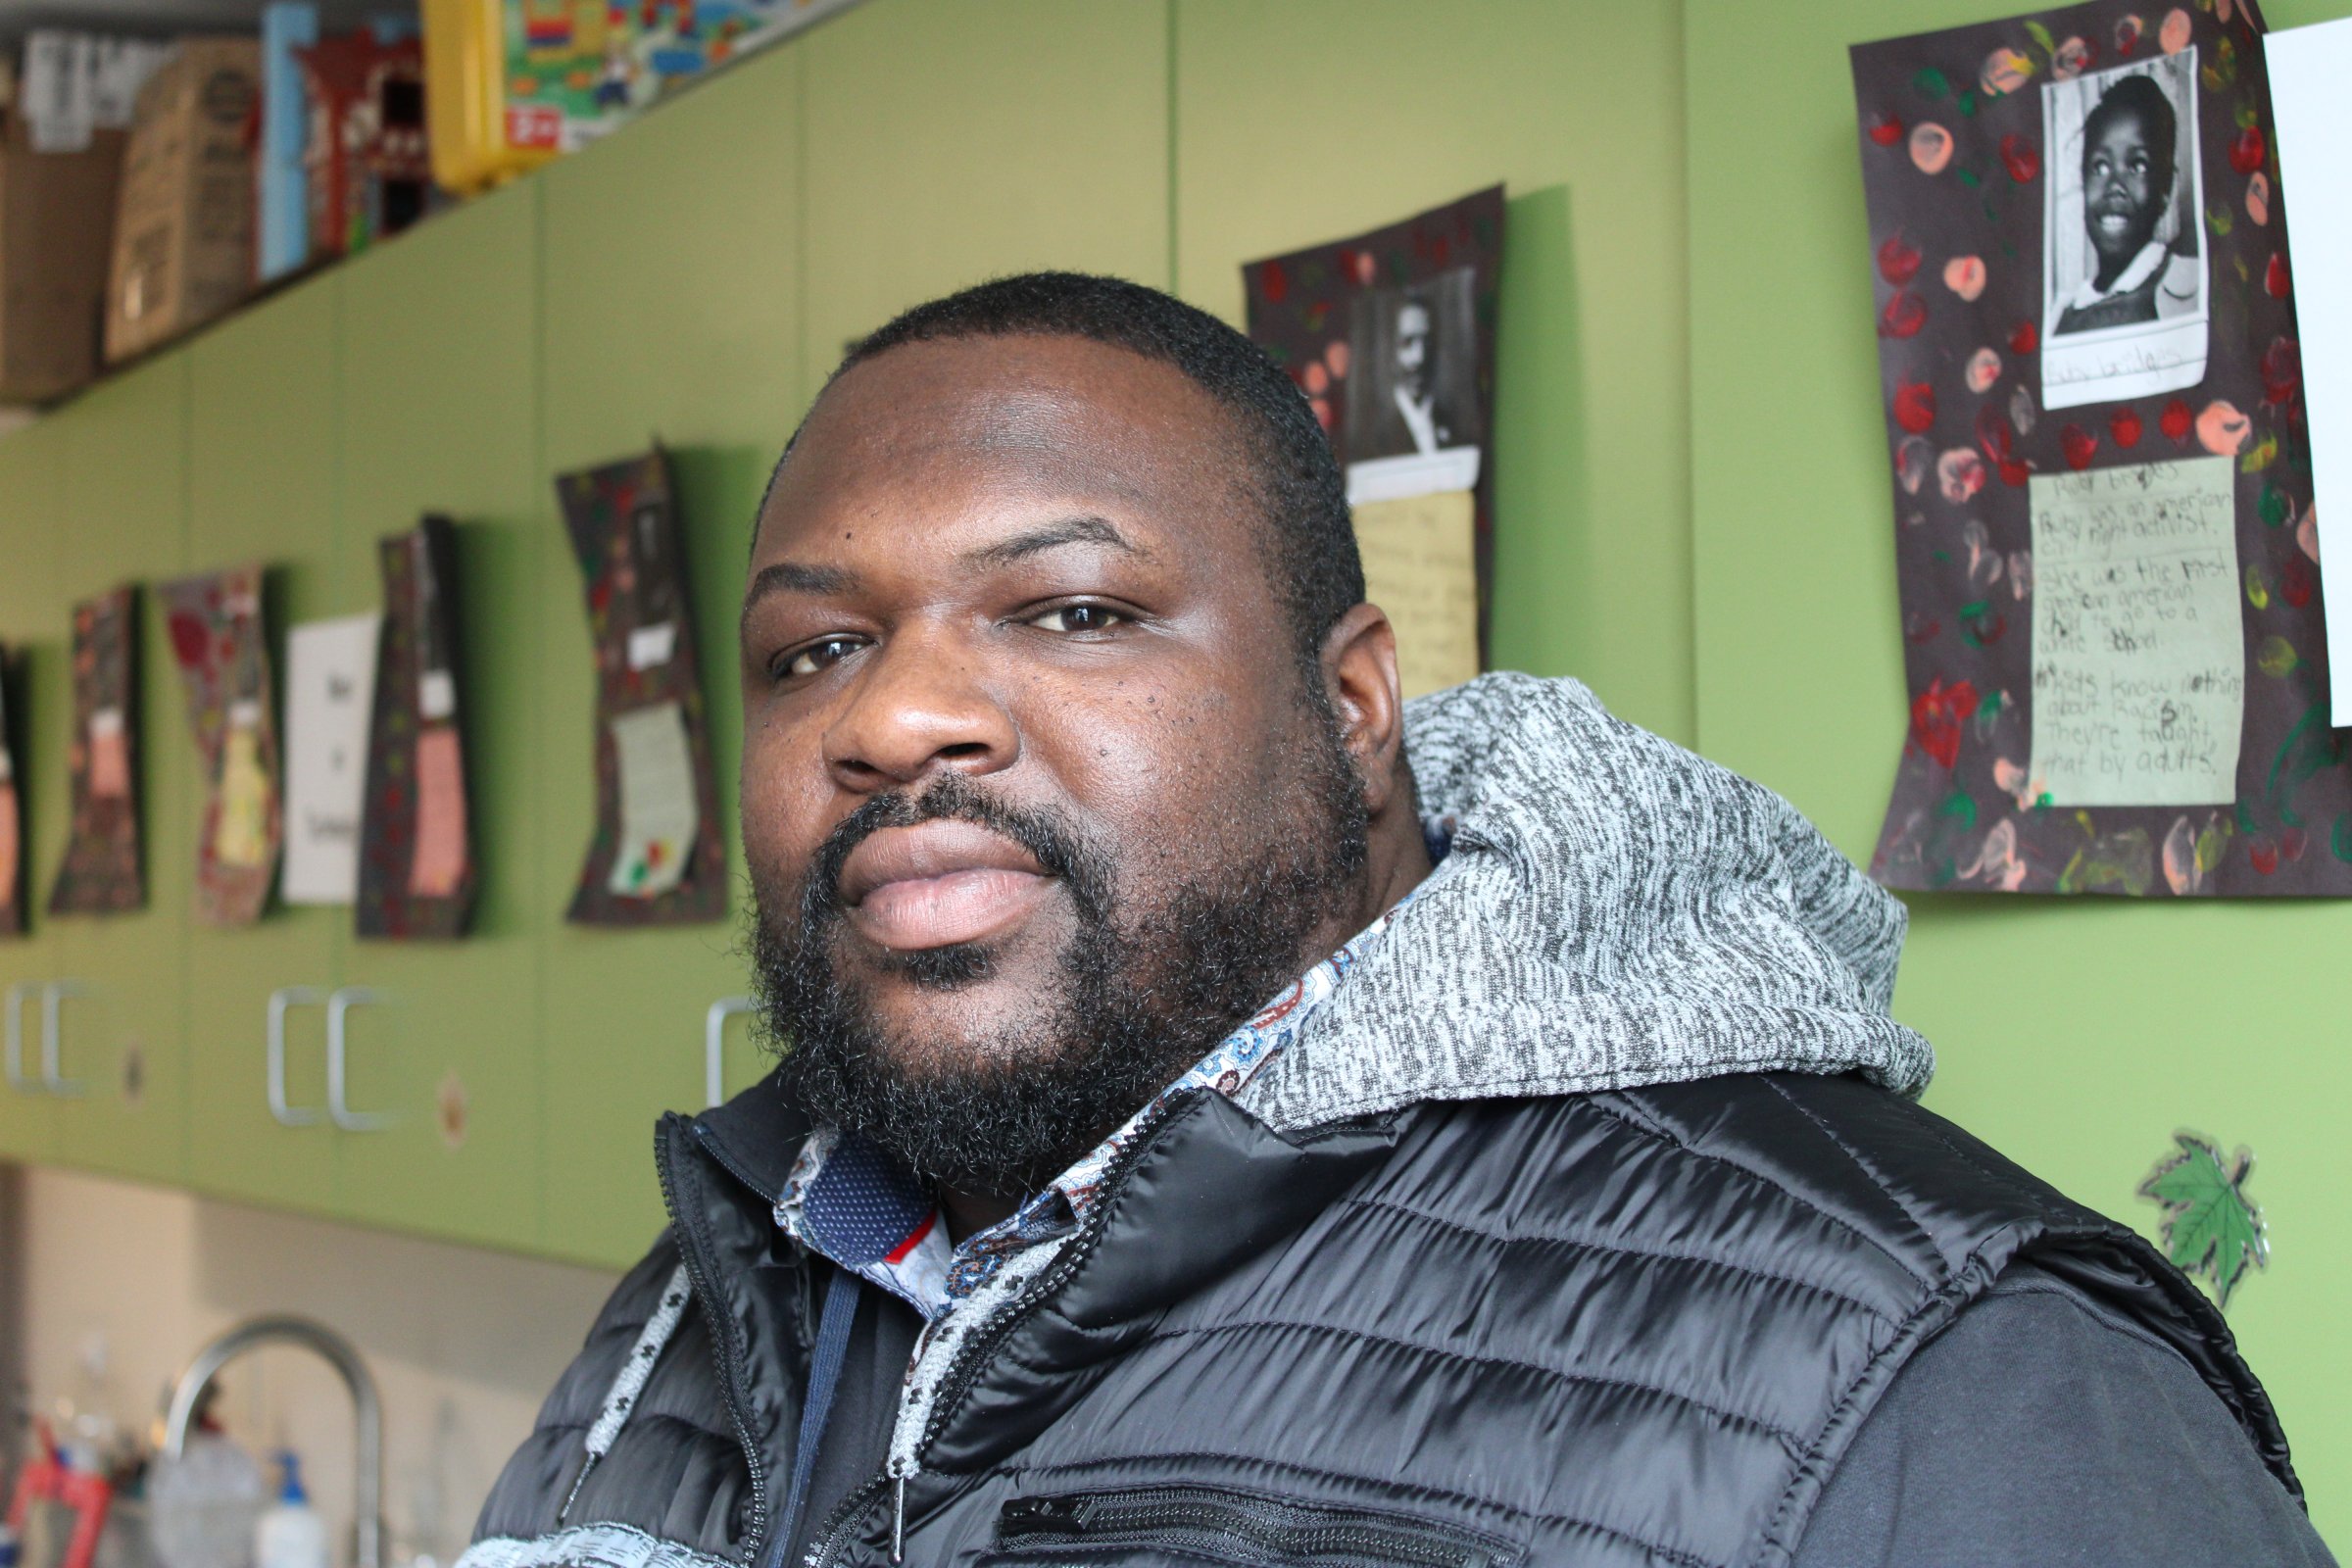 In his work with black teenagers, pastor and mental health caseworker Darnell Hill teaches an unofficial guide to what he calls “living while black.” Though many black families have their own sets of rules to navigate others’ racist assumptions, Hill says he hopes that following his “do’s and don’ts” will allow kids to survive as unscathed as possible to realize their life ambitions. “Let’s just make it home,” Hill tells them. (Cara Anthony/KHN)